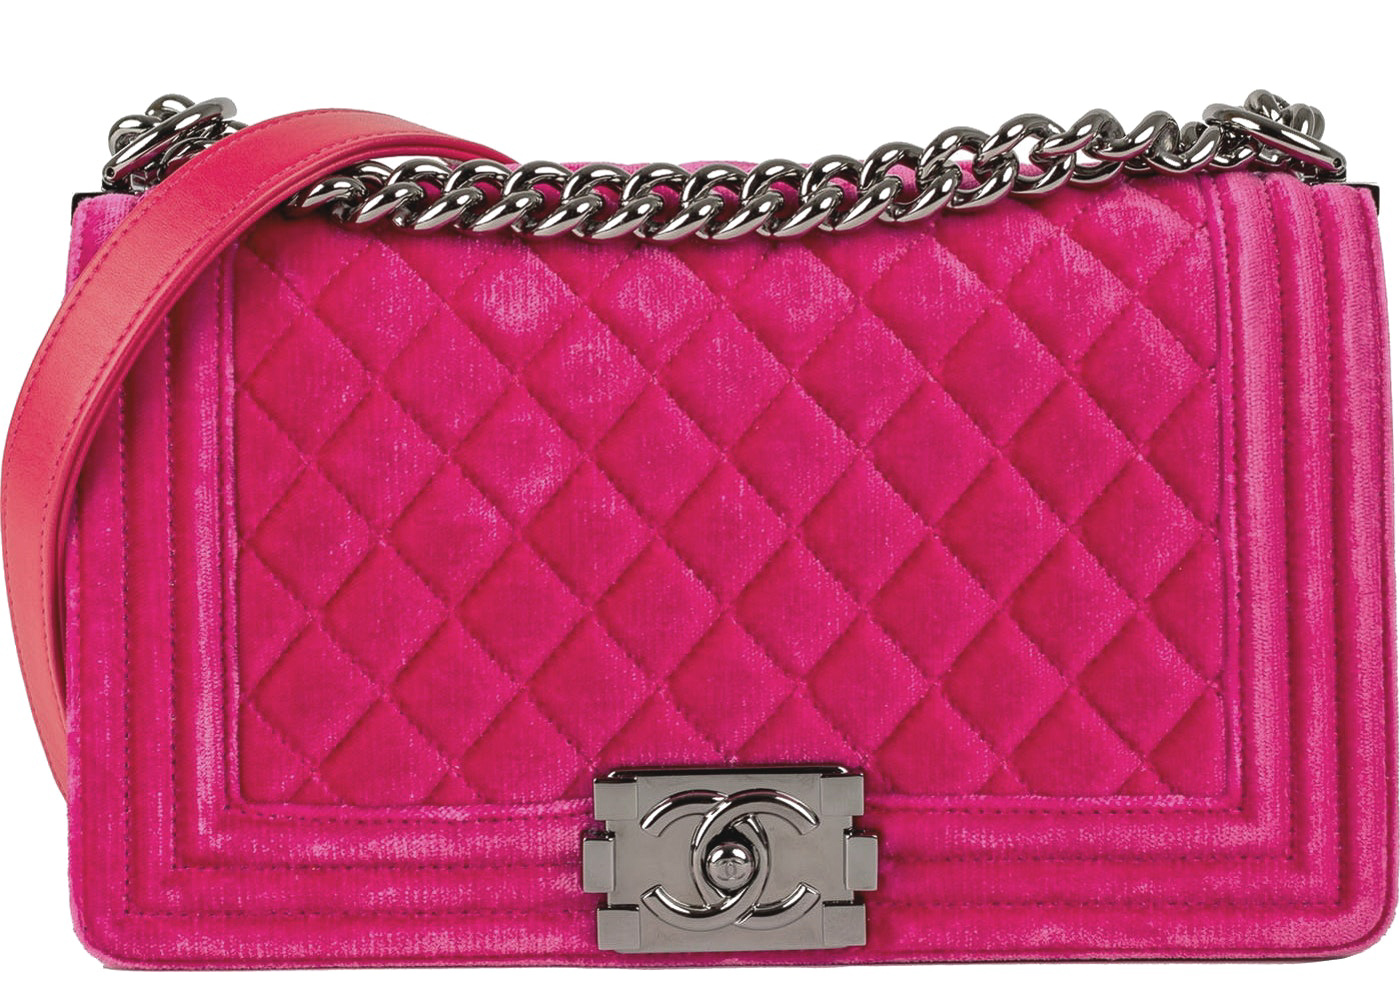 CHANEL MÉTIERS DART 2020 THE PINK VELVET BAG  MY THOUGHTS ON CHANELS  PRICE INCREASE FOR 2020  YouTube